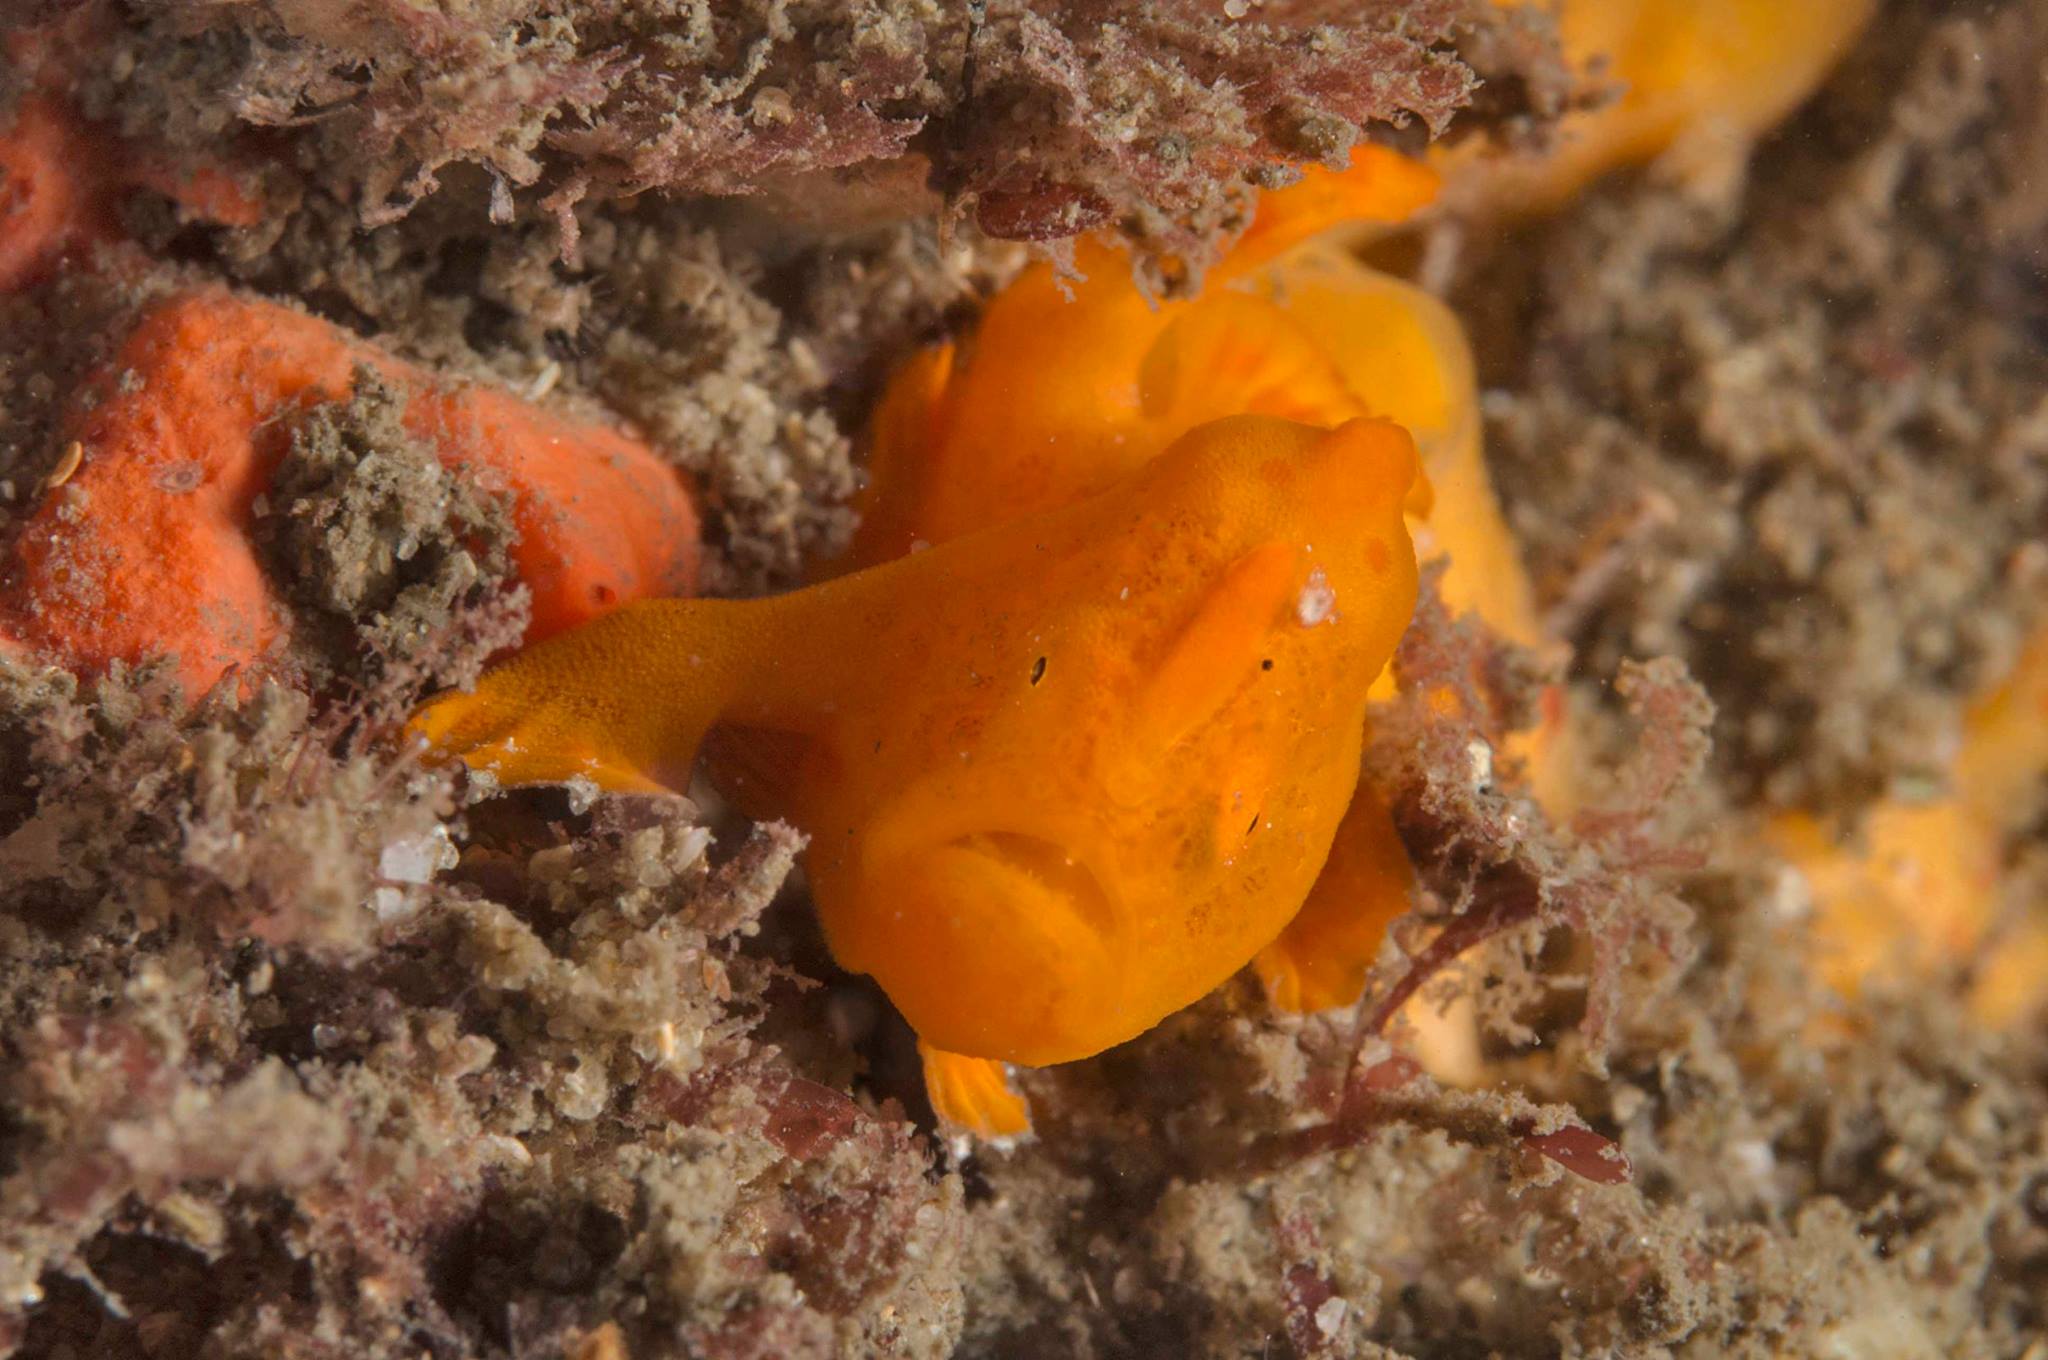 The tiniest, most adorable anglerfish I've ever seen! Photo by Jayne Jenkins.